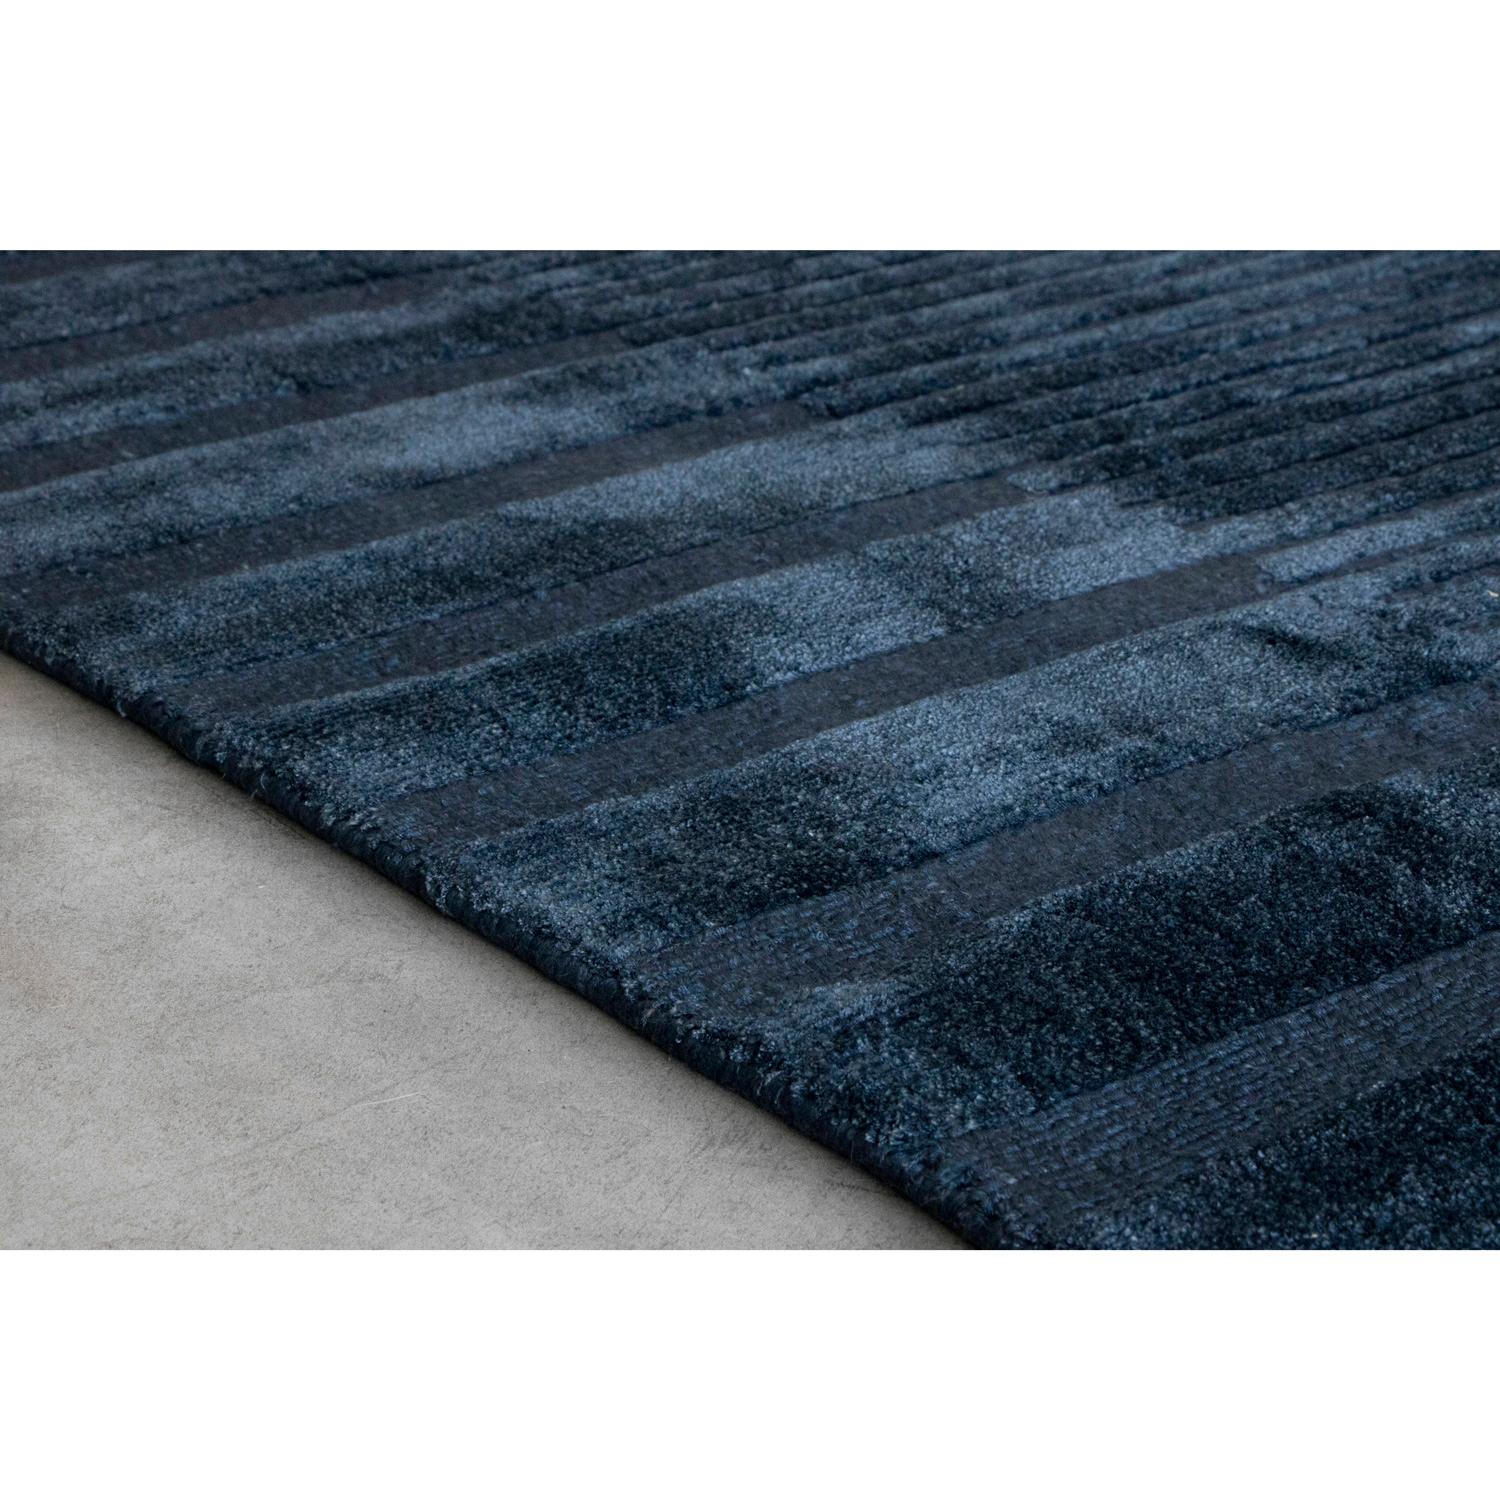 Indian 21st Cent Natural Striped Spring Blue Rug by Deanna Comellini In Stock 250x350cm For Sale